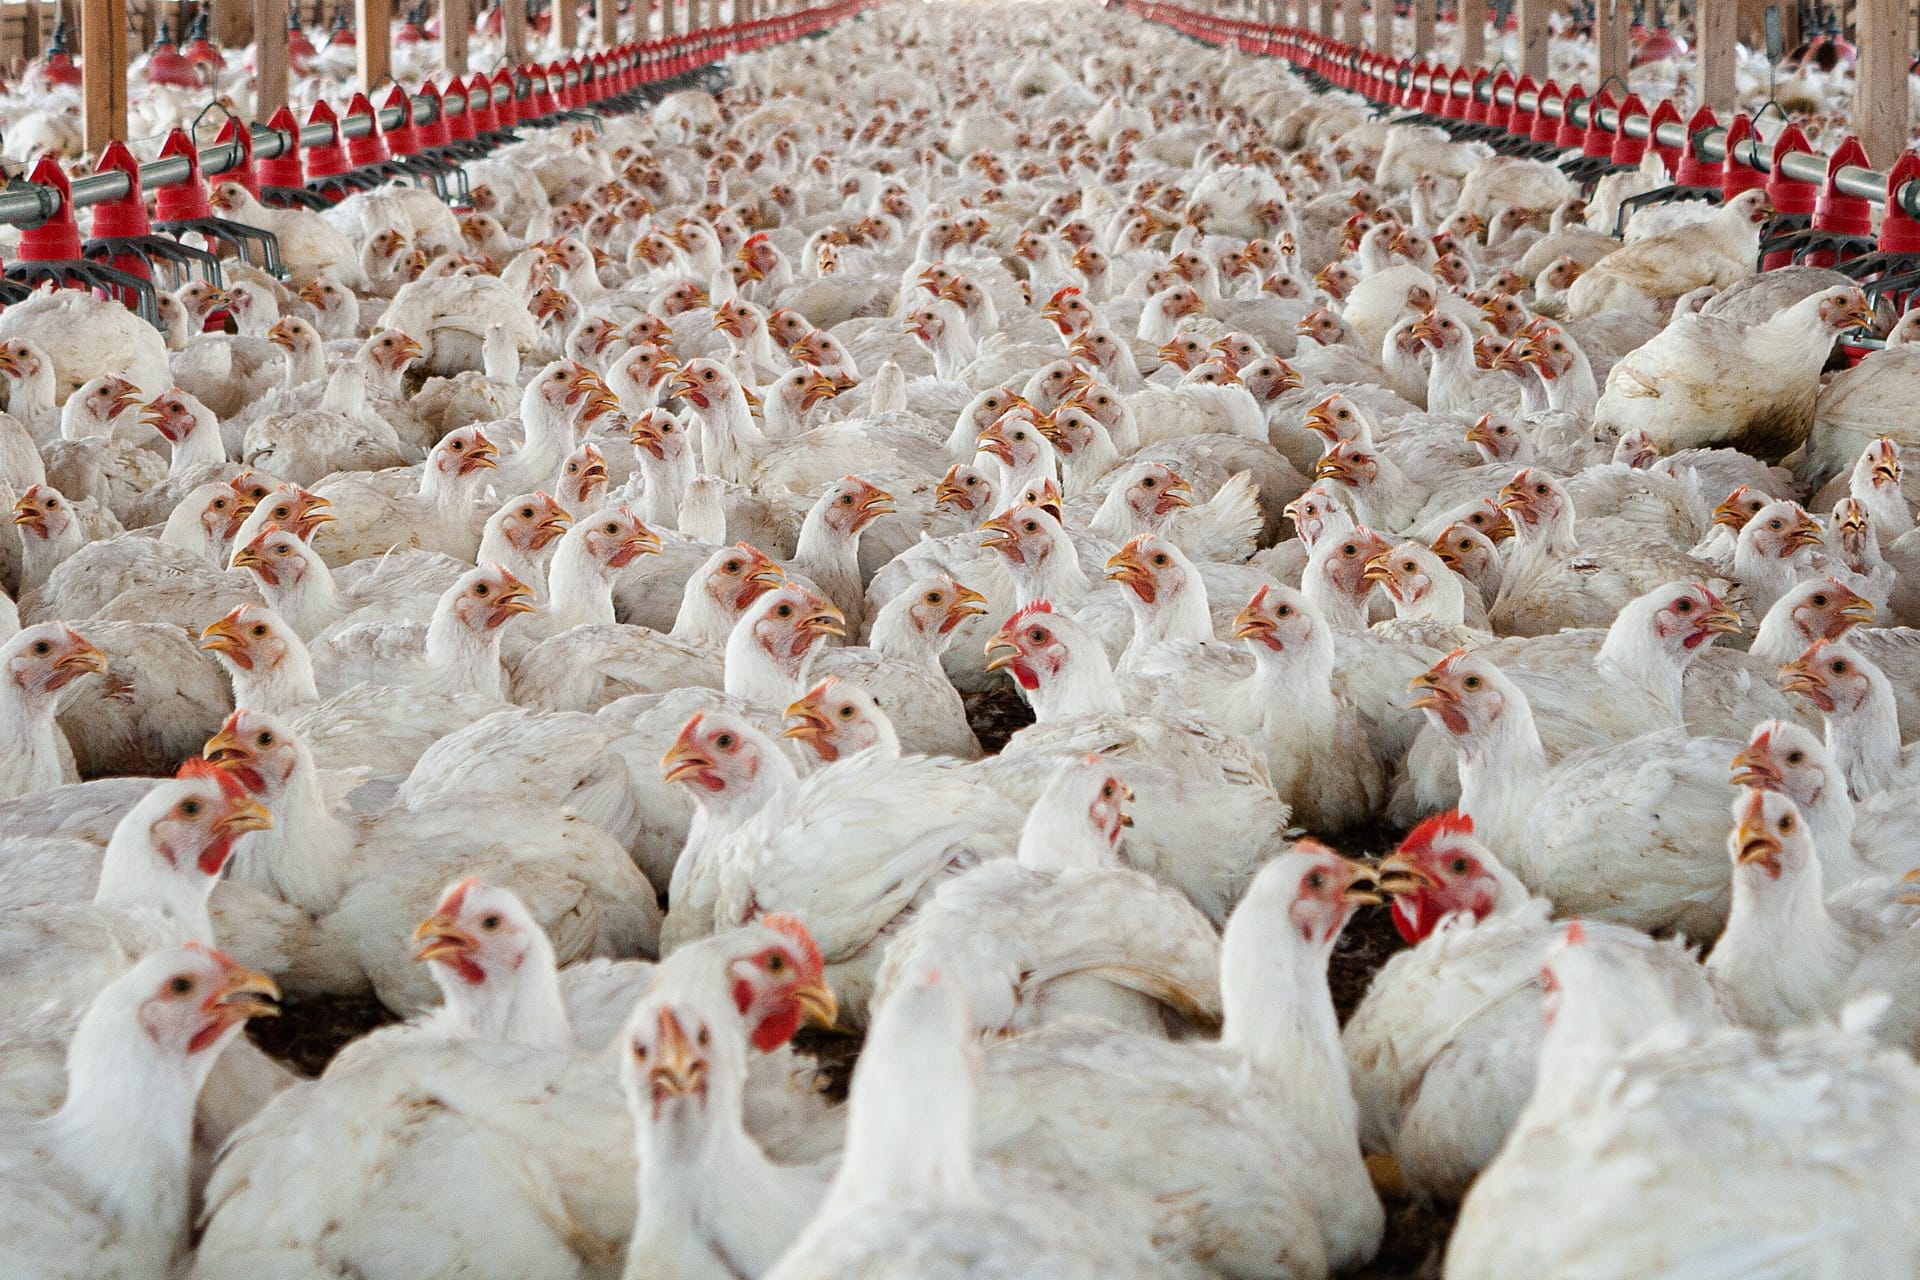 Image chows broiler chickens in factory farm